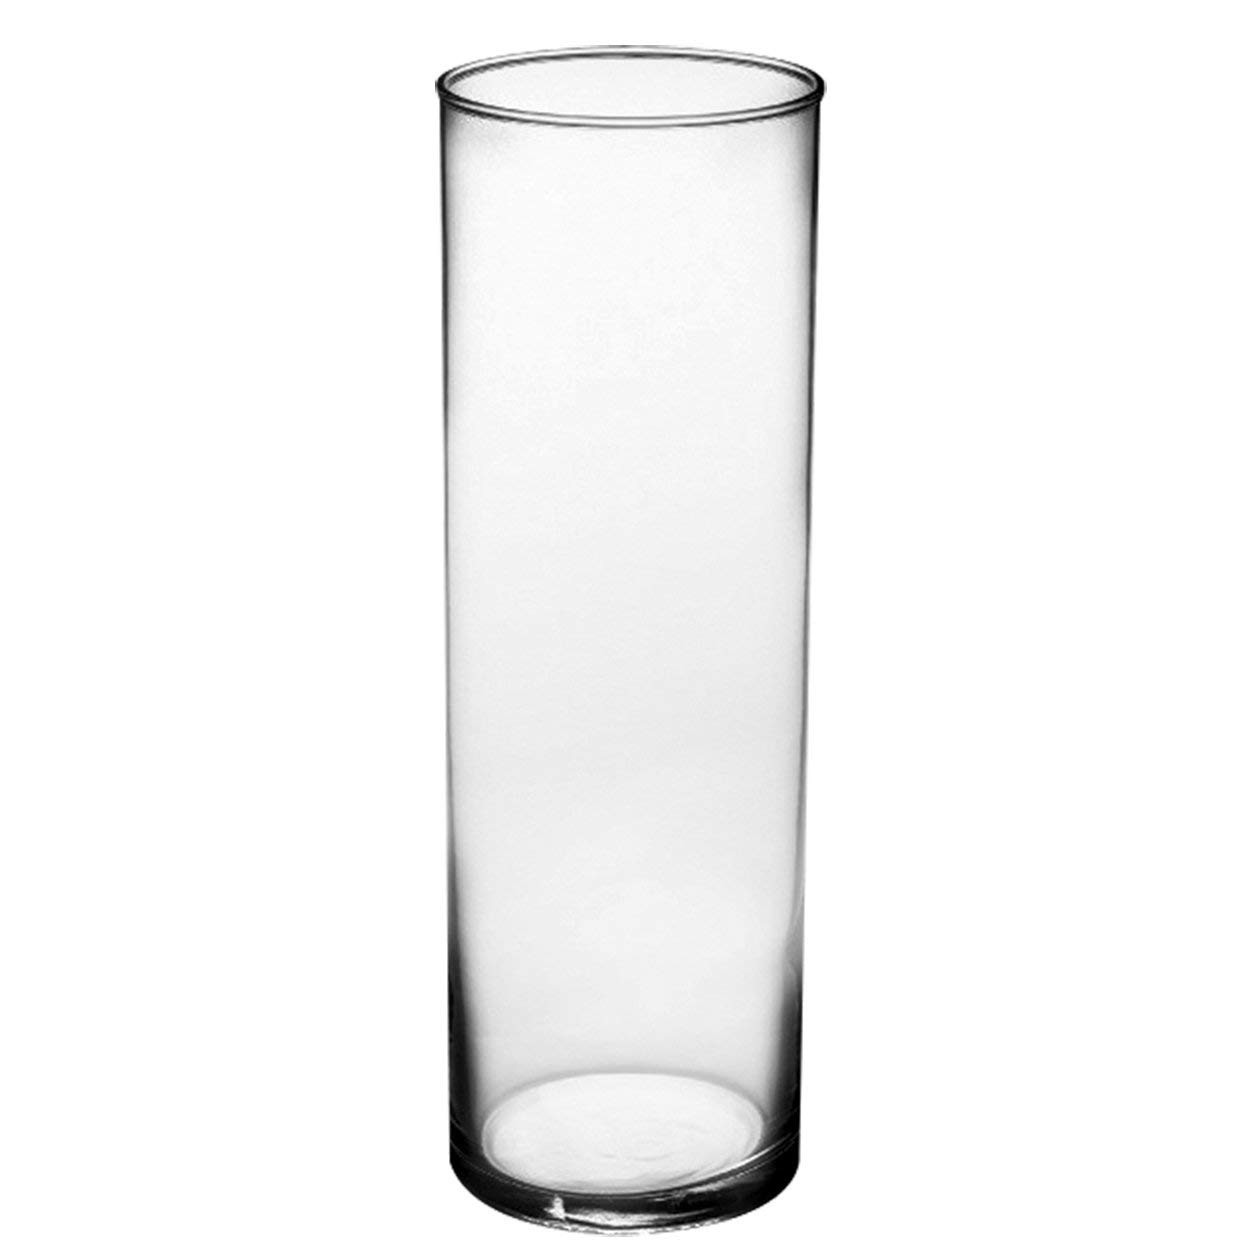 12 inch cylinder vases cheap of amazon com syndicate sales 3 1 2 x 10 1 2 cylinder vase clear throughout amazon com syndicate sales 3 1 2 x 10 1 2 cylinder vase clear planters garden outdoor